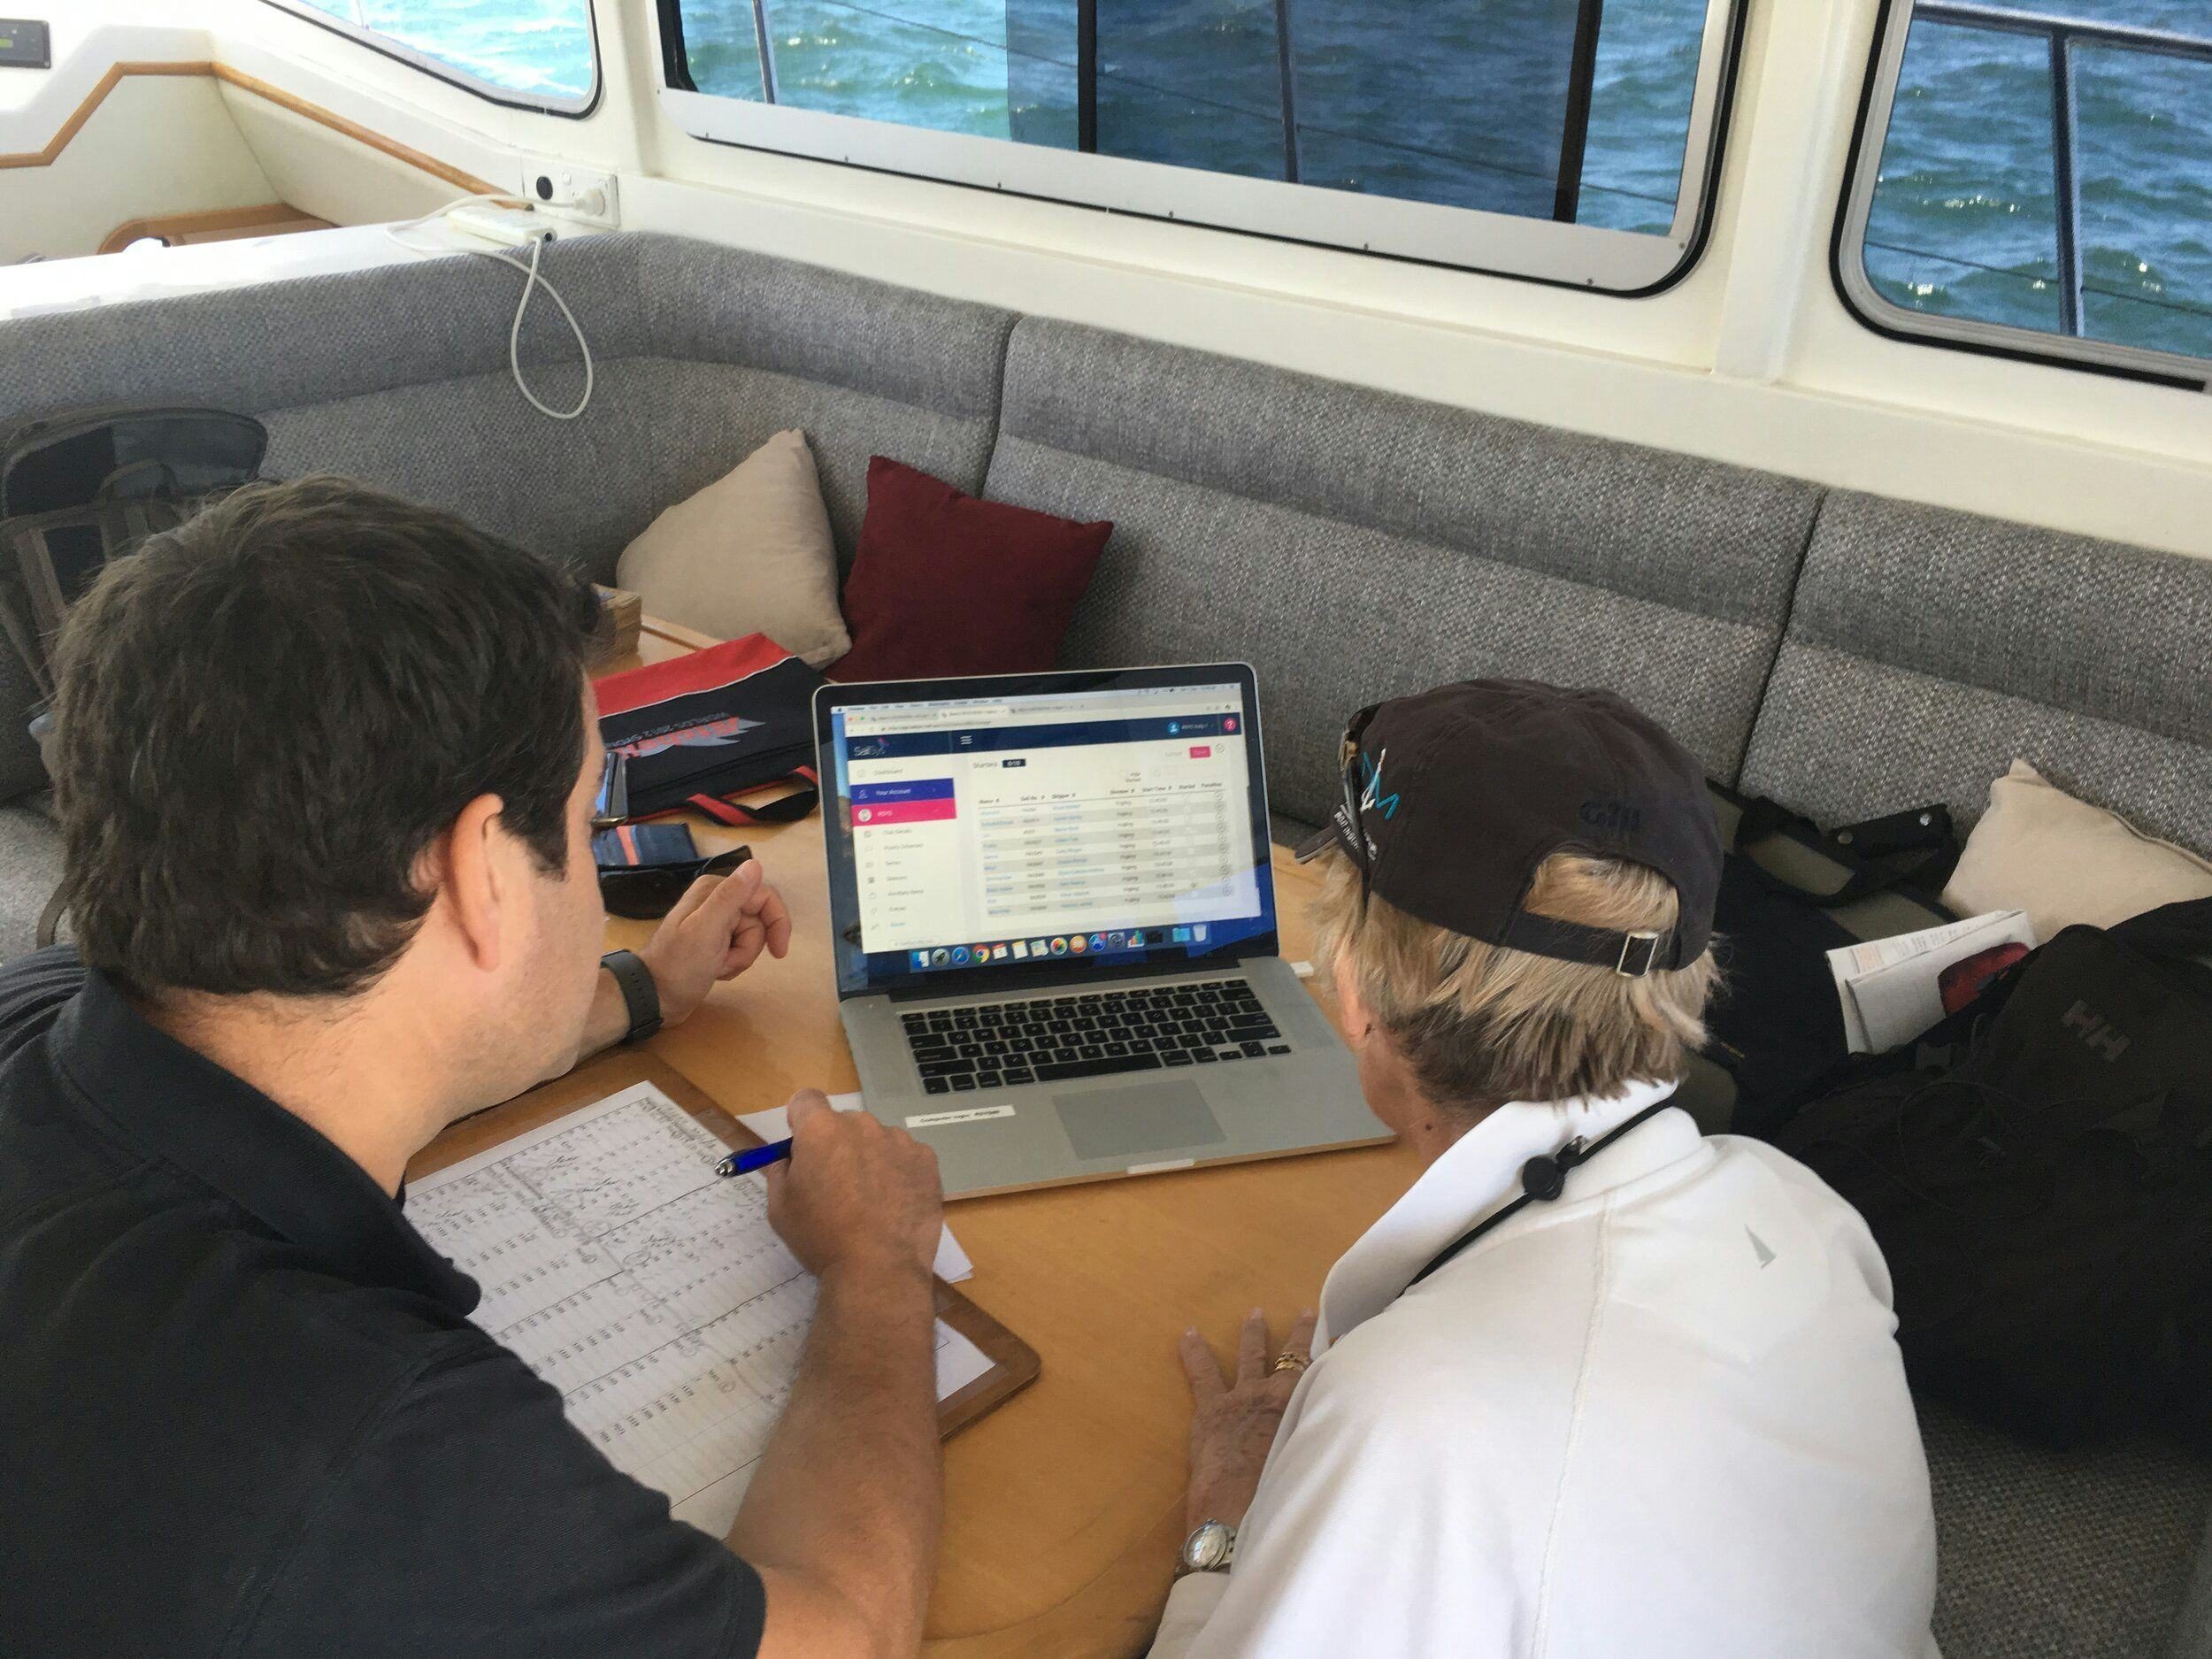 A photo of SailSys being used on a laptop on a committee boat